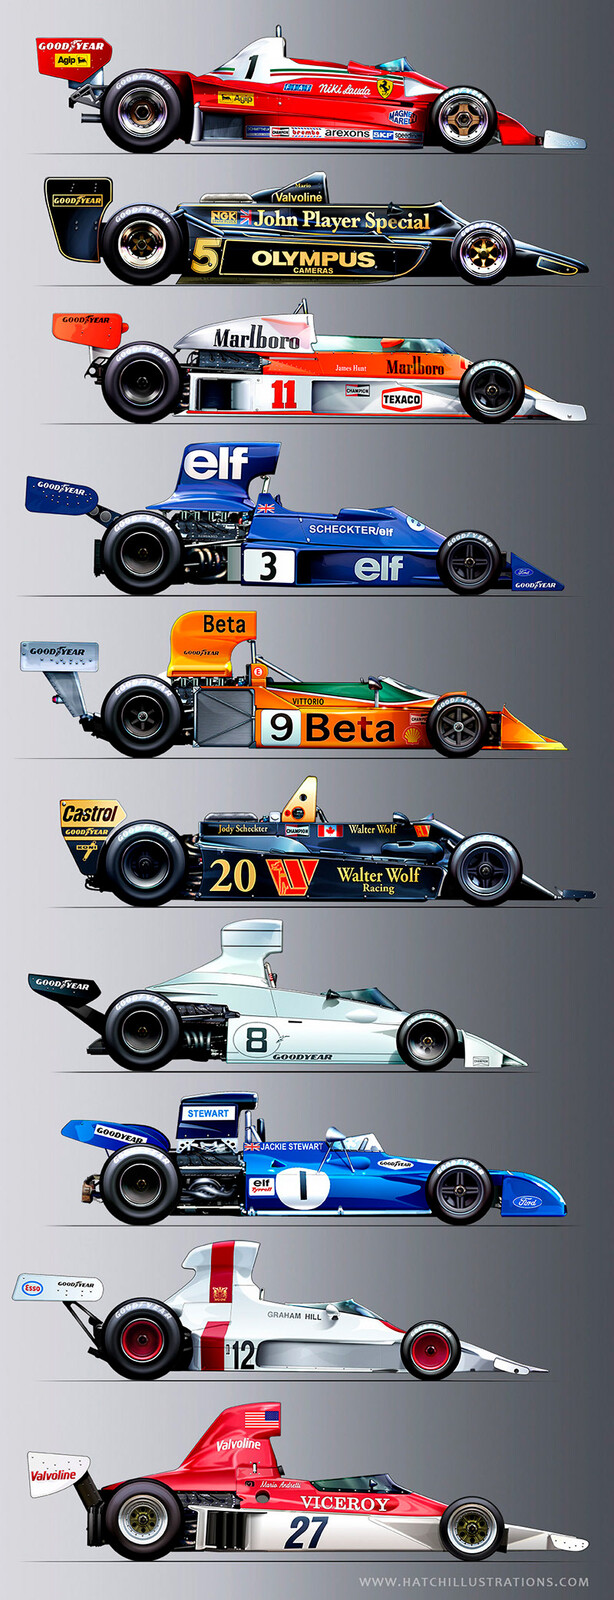 Vintage Formula One, F1 race cars from the FIA 3-Litre era 1966-1983.  